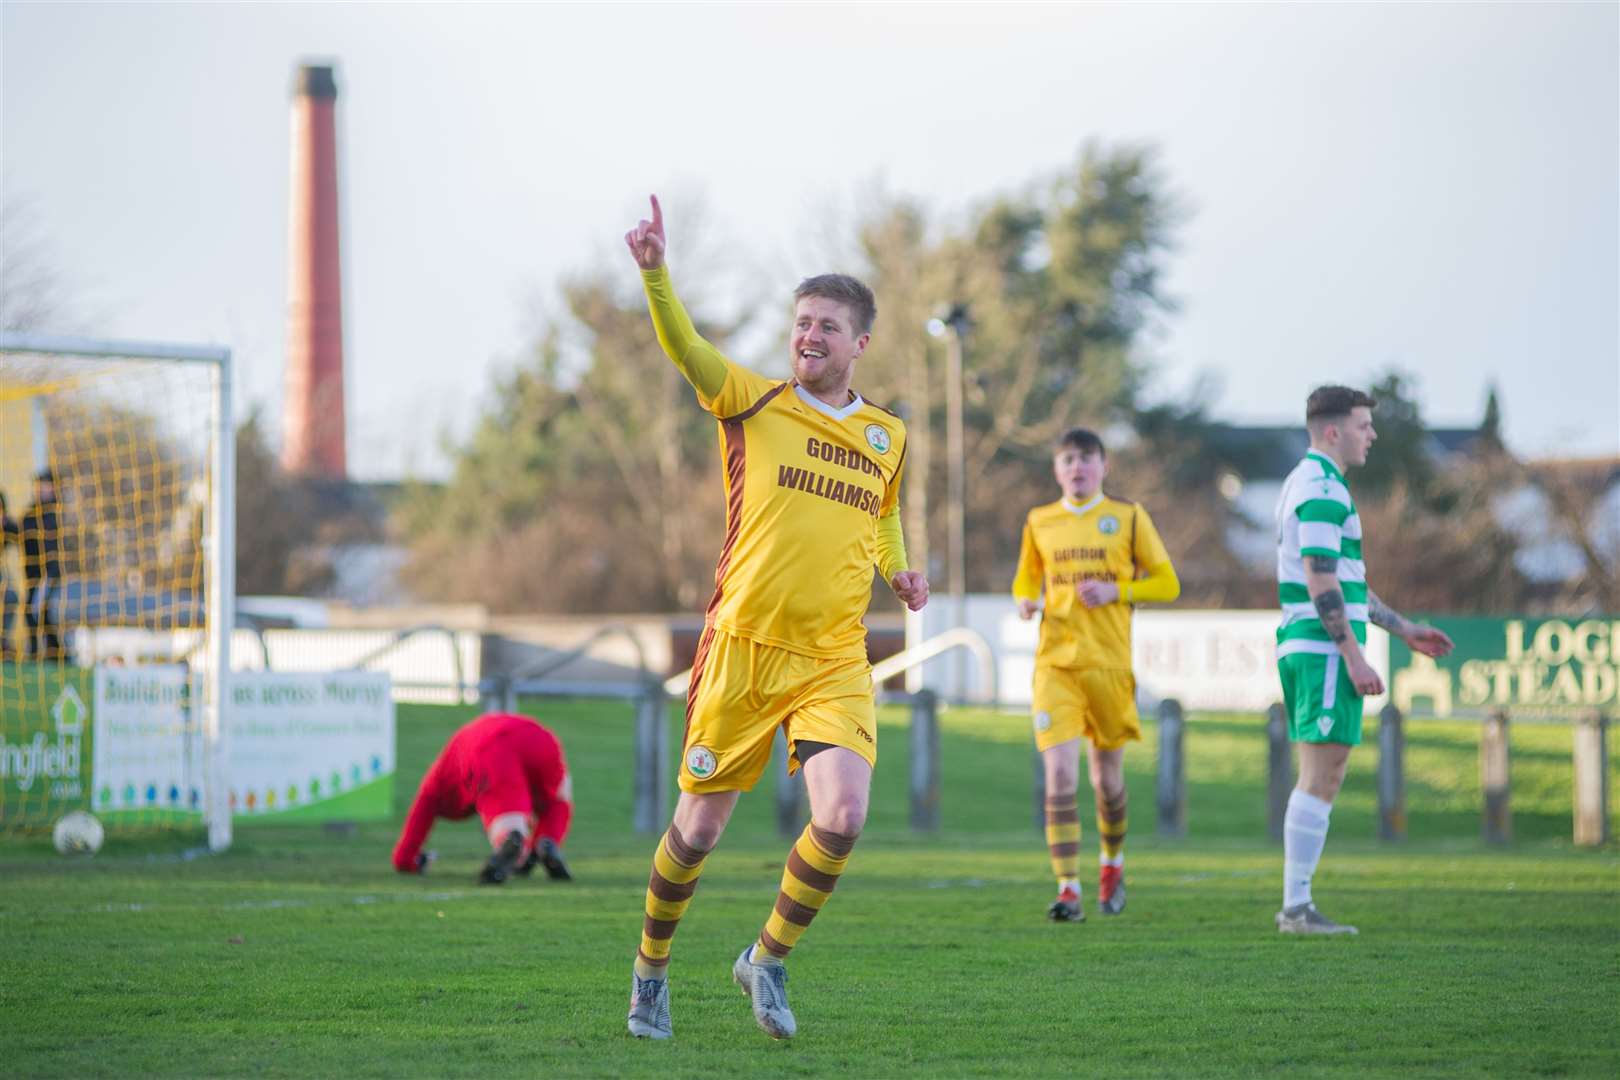 Forres Mechanics' Robert Duncanson wheels away to celebrate opening the scoring for the homeside...Forres Mechanics FC (2) vs Buckie Thistle FC (2) - Highland Football League - Mosset Park, Forres 08/02/2020...Picture: Daniel Forsyth..